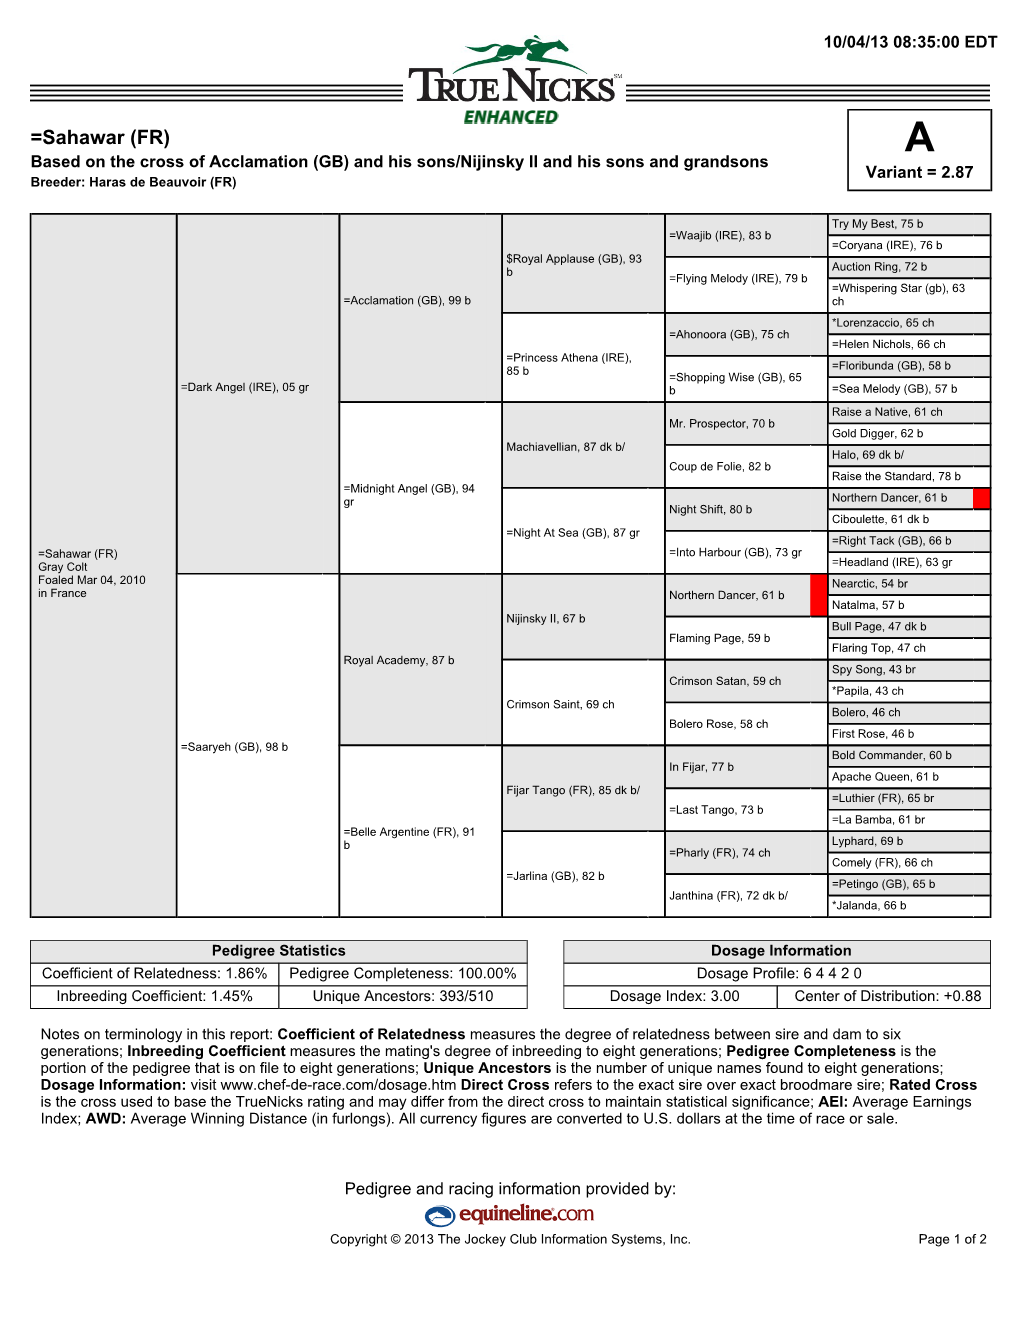 =Sahawar (FR) a Based on the Cross of Acclamation (GB) and His Sons/Nijinsky II and His Sons and Grandsons Variant = 2.87 Breeder: Haras De Beauvoir (FR)